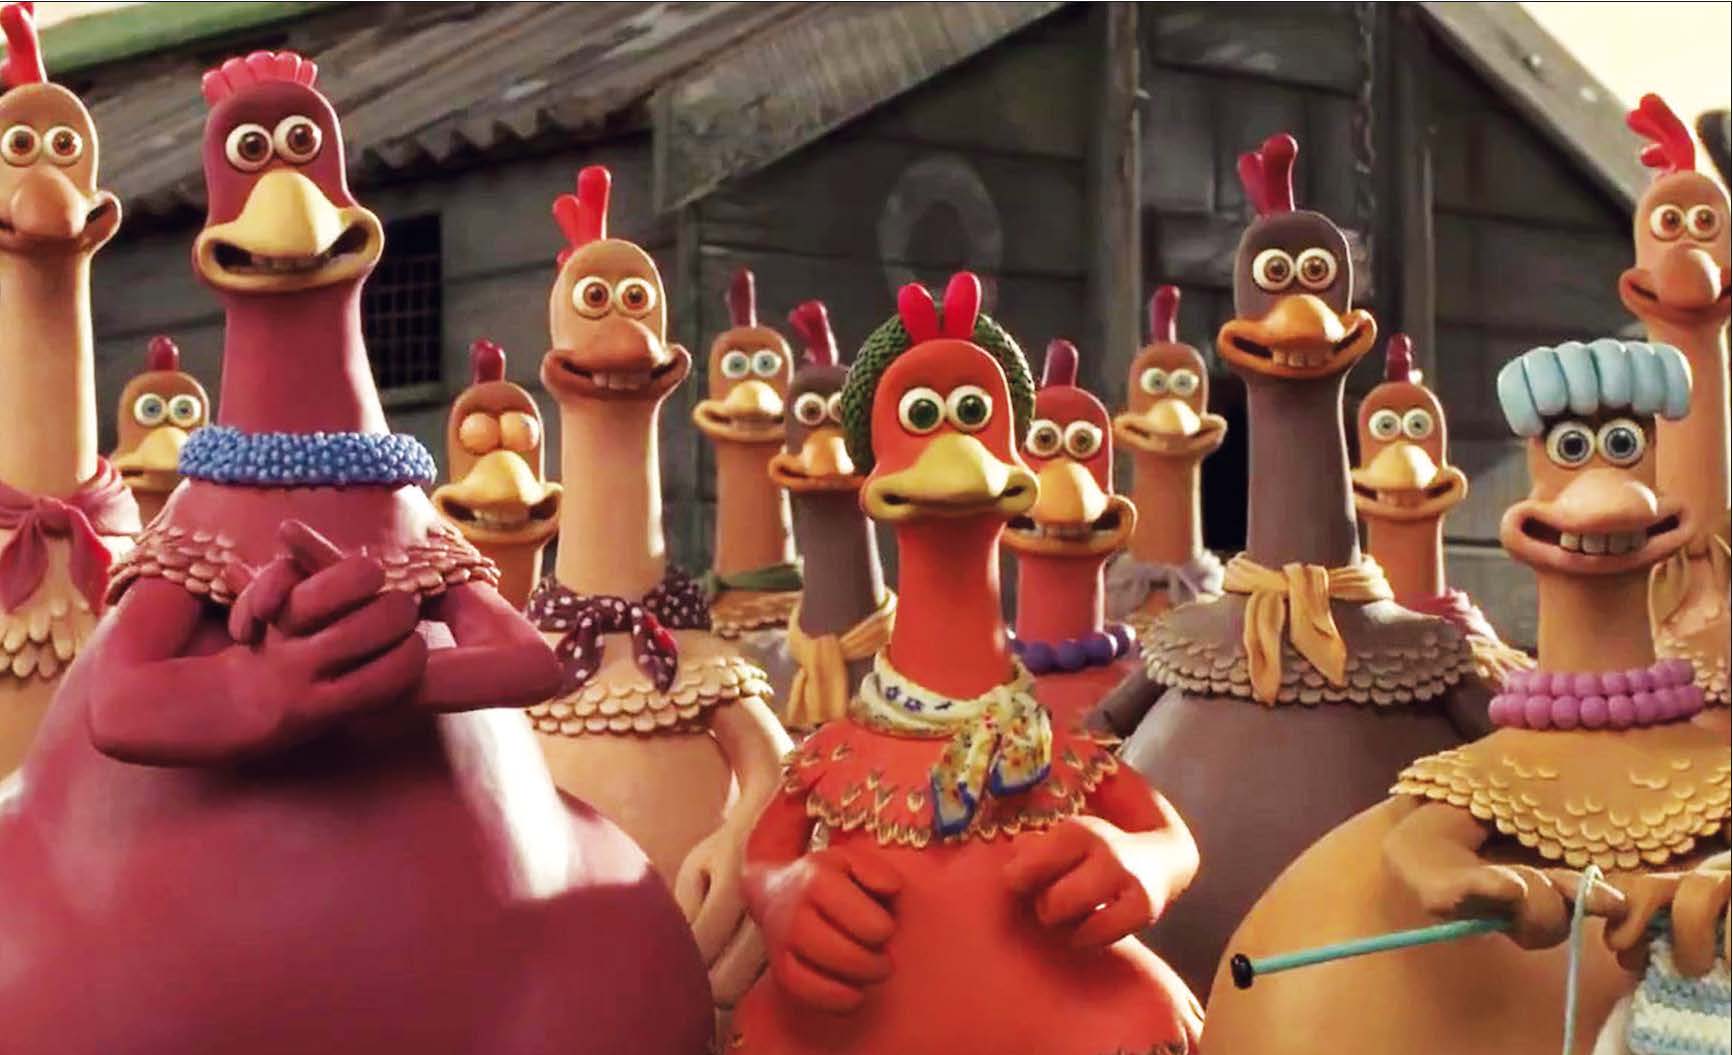 <span  class="uc_style_uc_tiles_grid_image_elementor_uc_items_attribute_title" style="color:#ffffff;">photo film Chicken run</span>